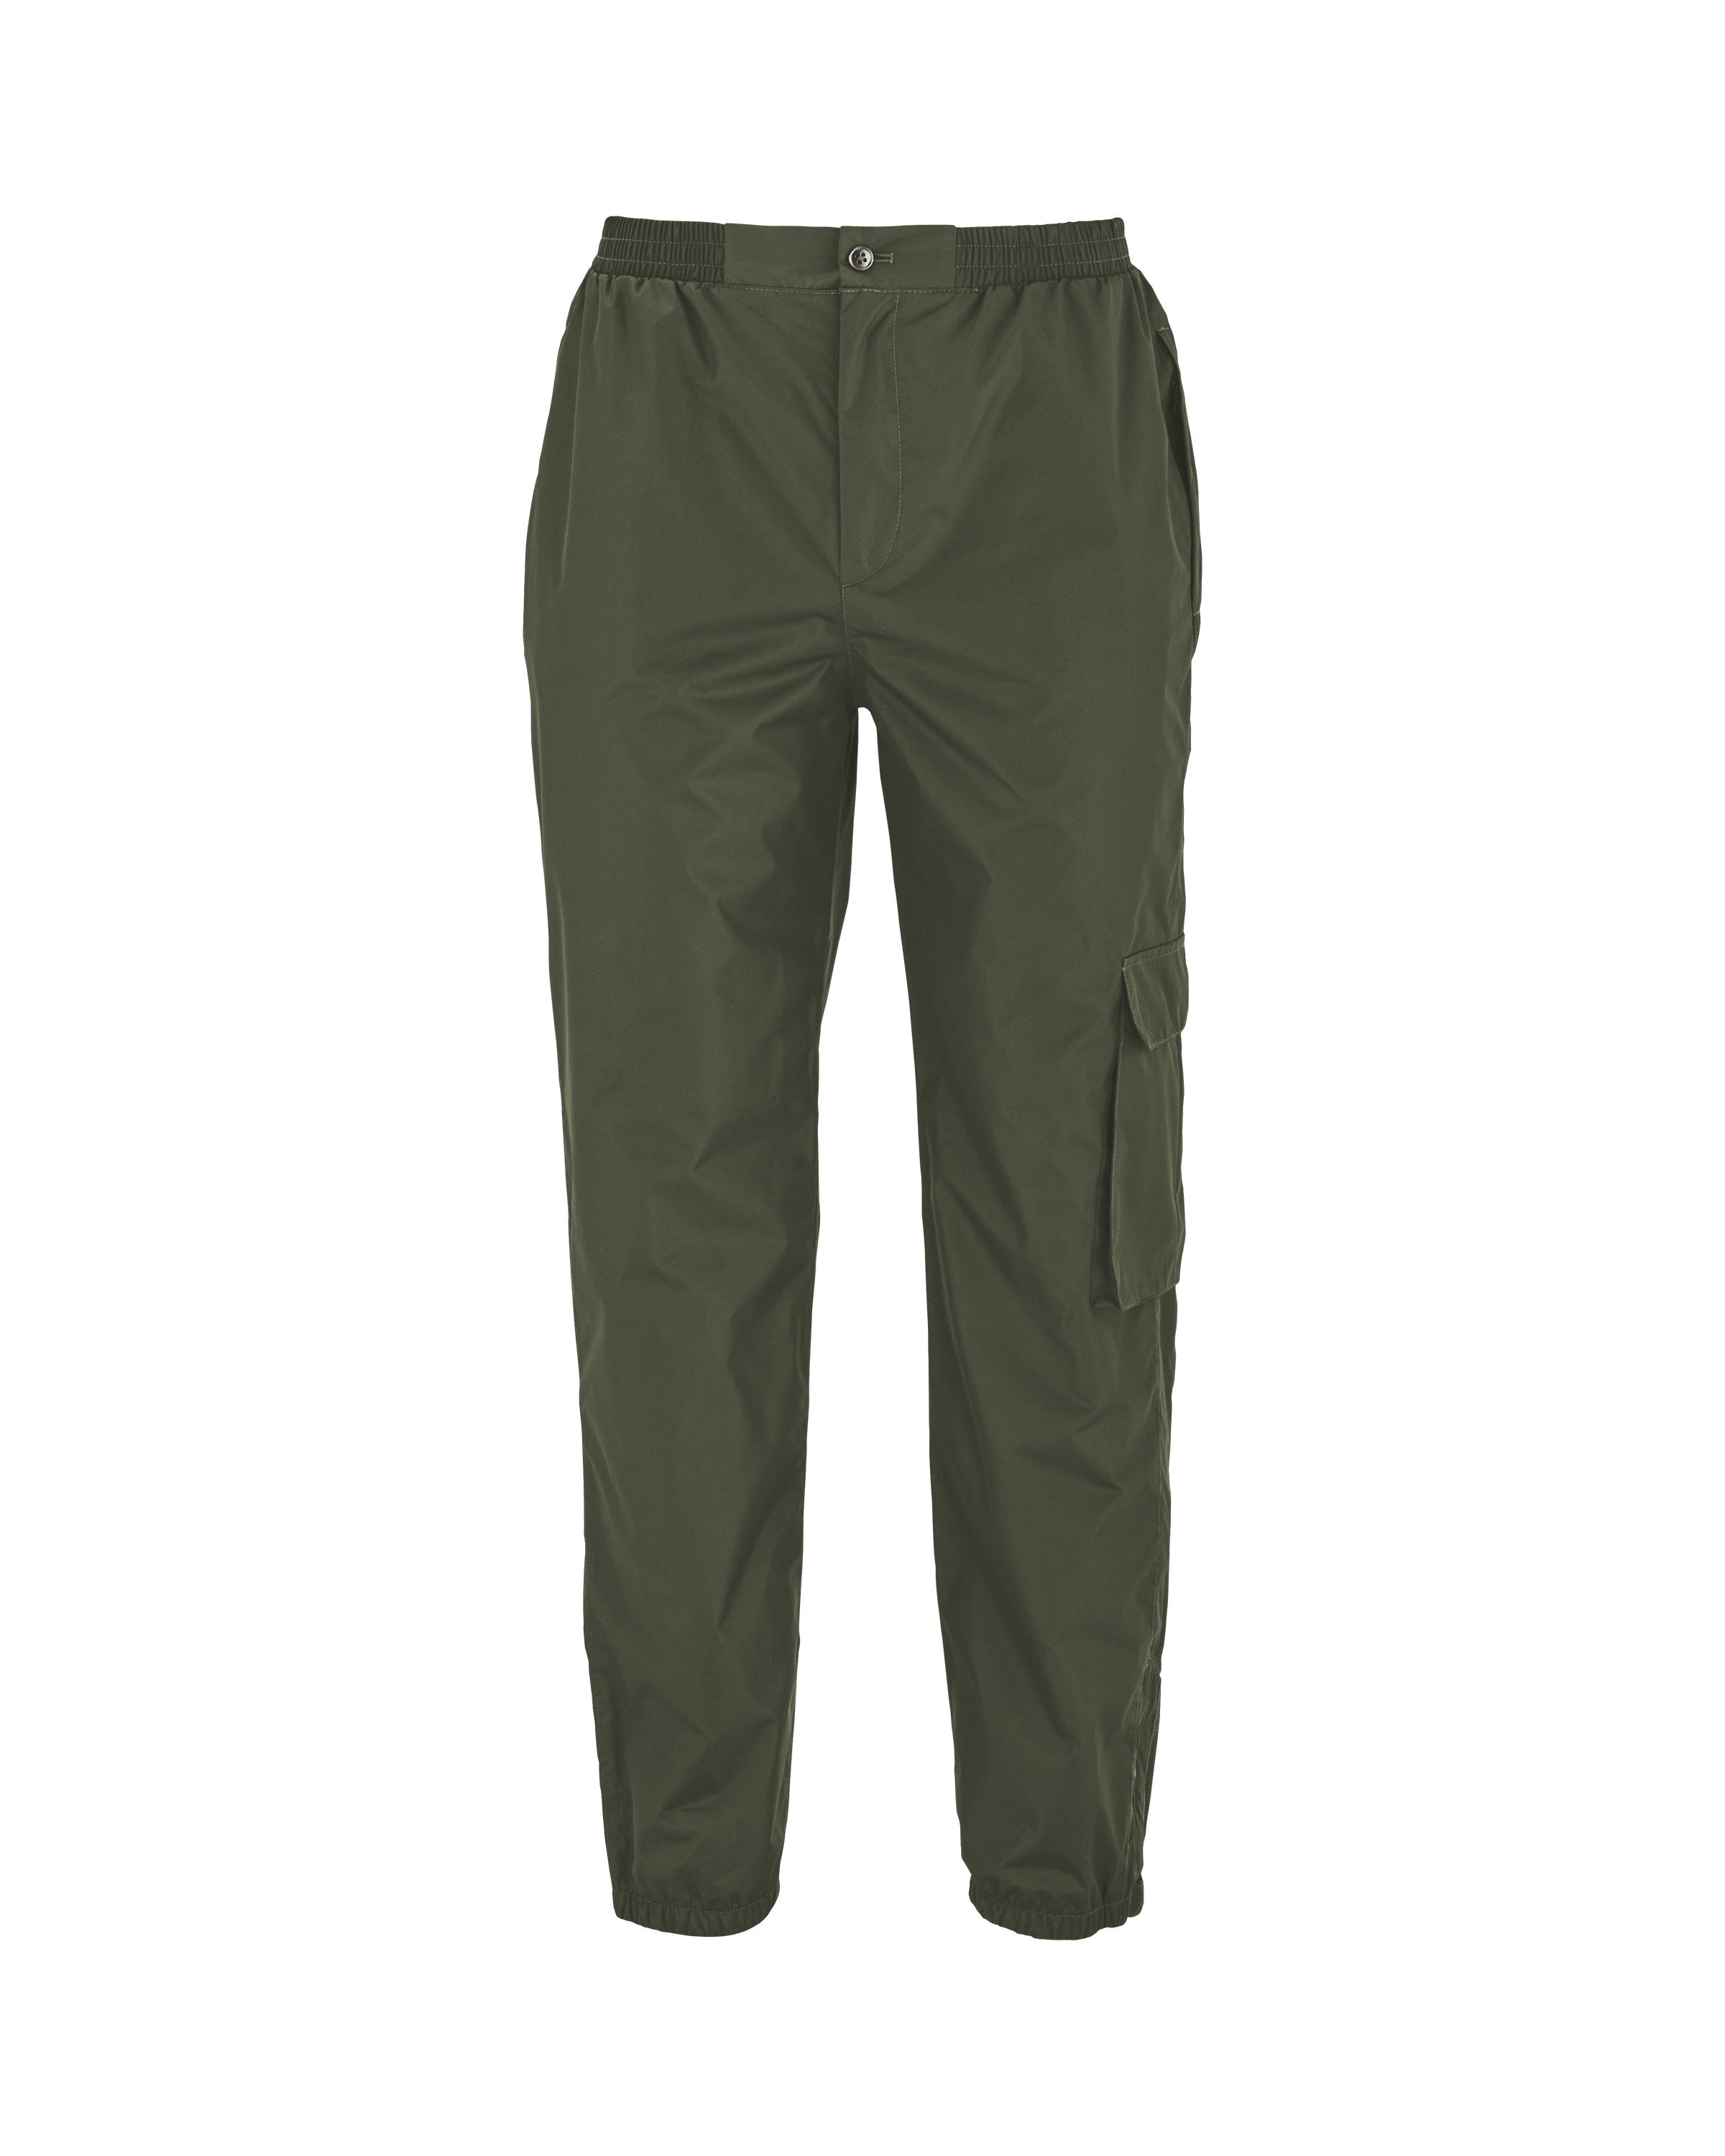 ALDI Crane Training Pants, Large - Green Same-Day Delivery or